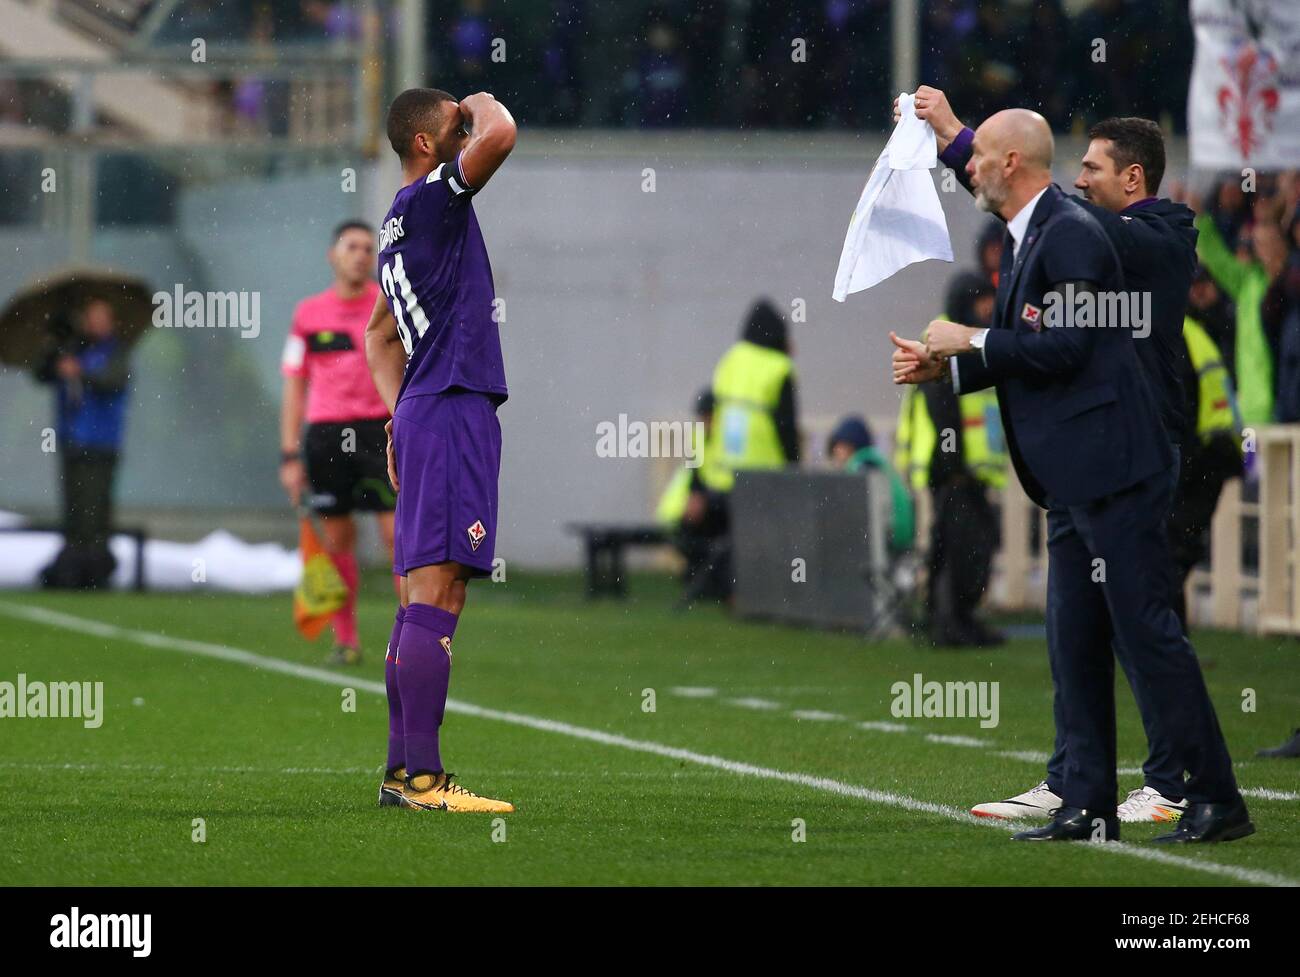 Soccer Football - Serie A - Fiorentina vs Benevento Calcio - Stadio Artemio Franchi, Florence, Italy - March 11, 2018   Fiorentina's Vitor Hugo celebrates scoring their first goal as a shirt with a picture of former player Davide Astori is held up   REUTERS/Alessandro Bianchi Stock Photo